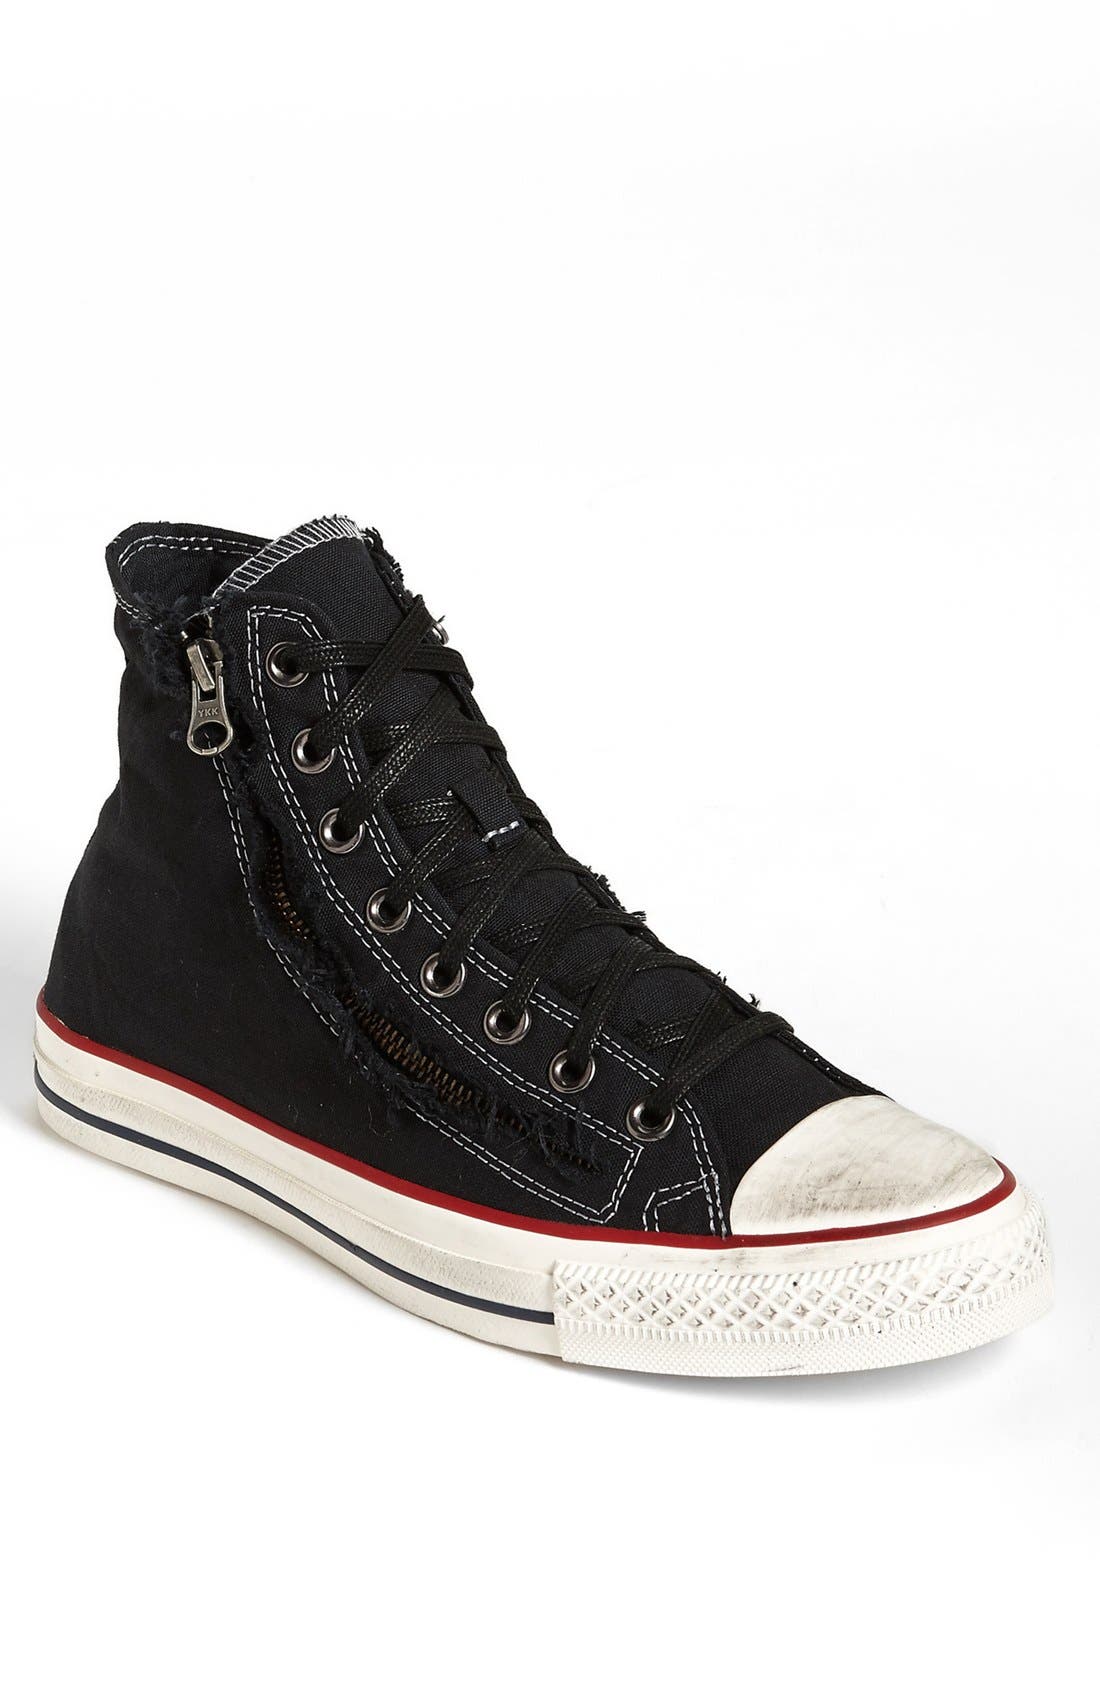 converse all star distressed